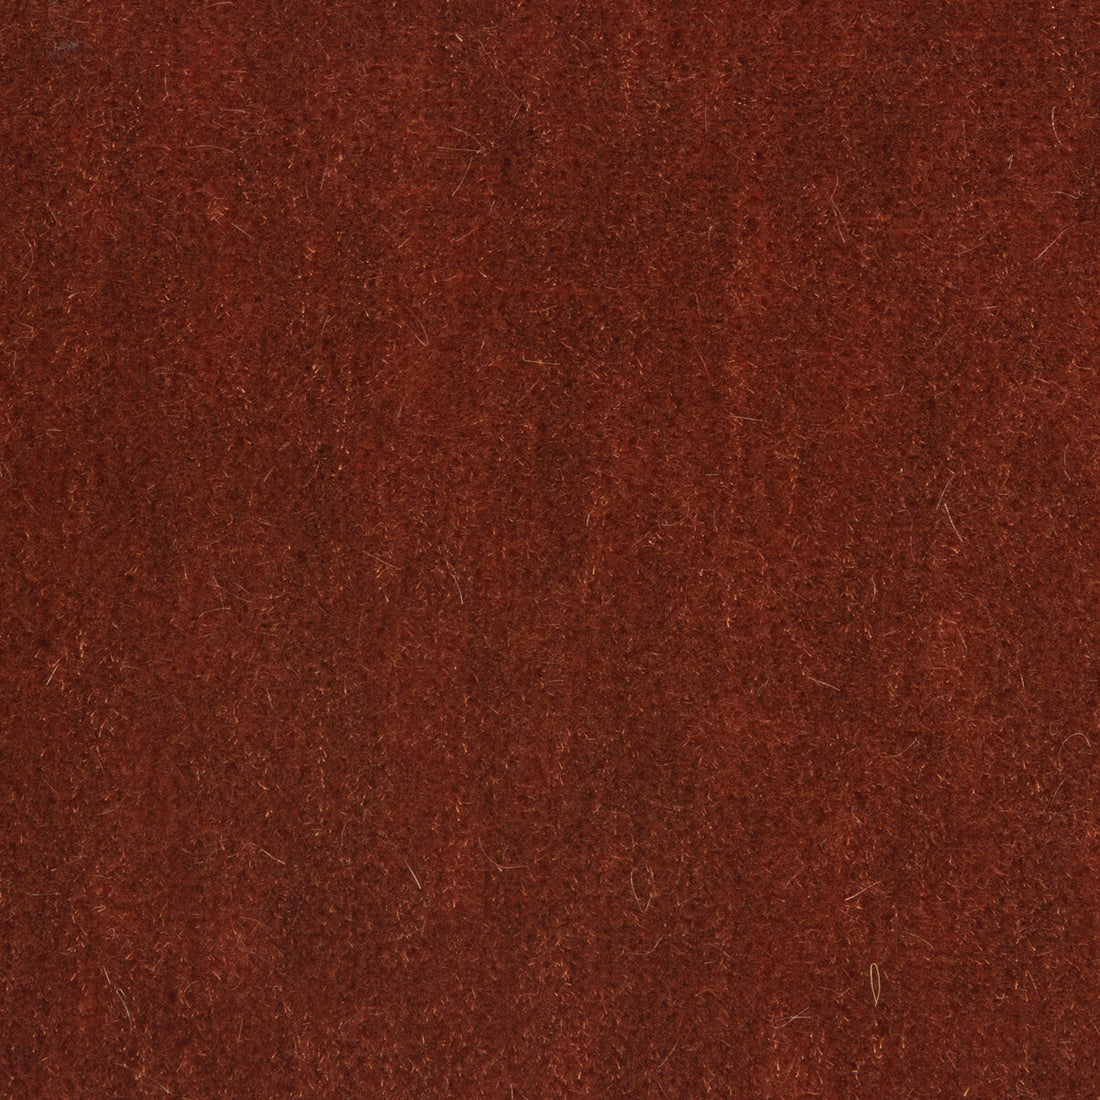 Bachelor Mohair fabric in paprika color - pattern 8014101.624.0 - by Brunschwig &amp; Fils